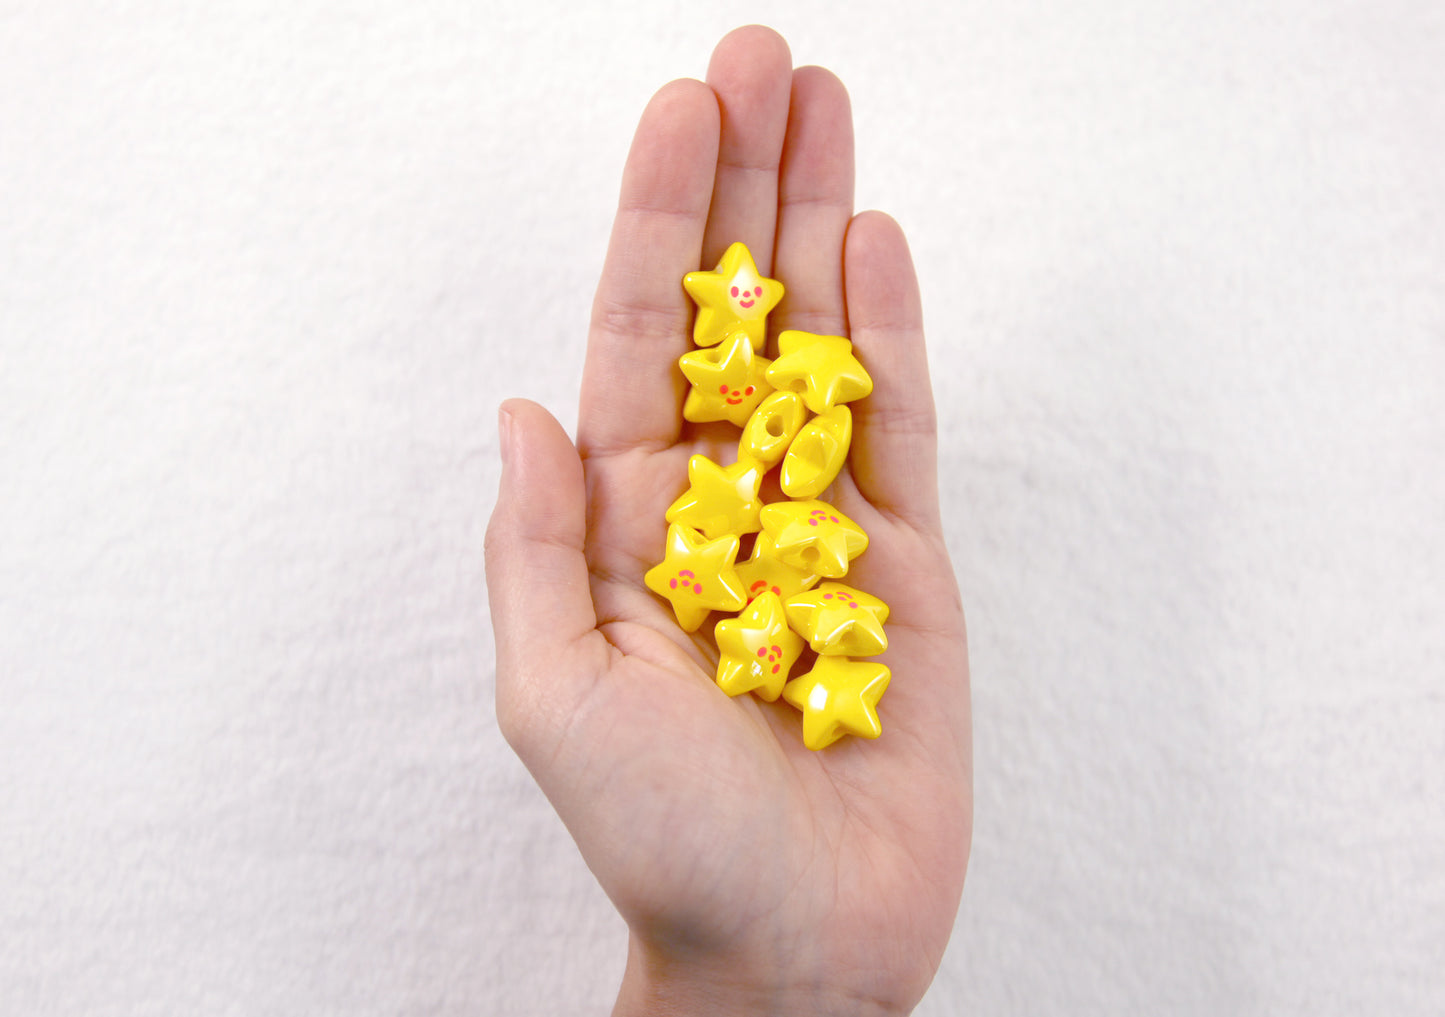 Cute Star Beads - 20mm AB Happy Star with Face Resin or Acrylic Beads - 10 pc set